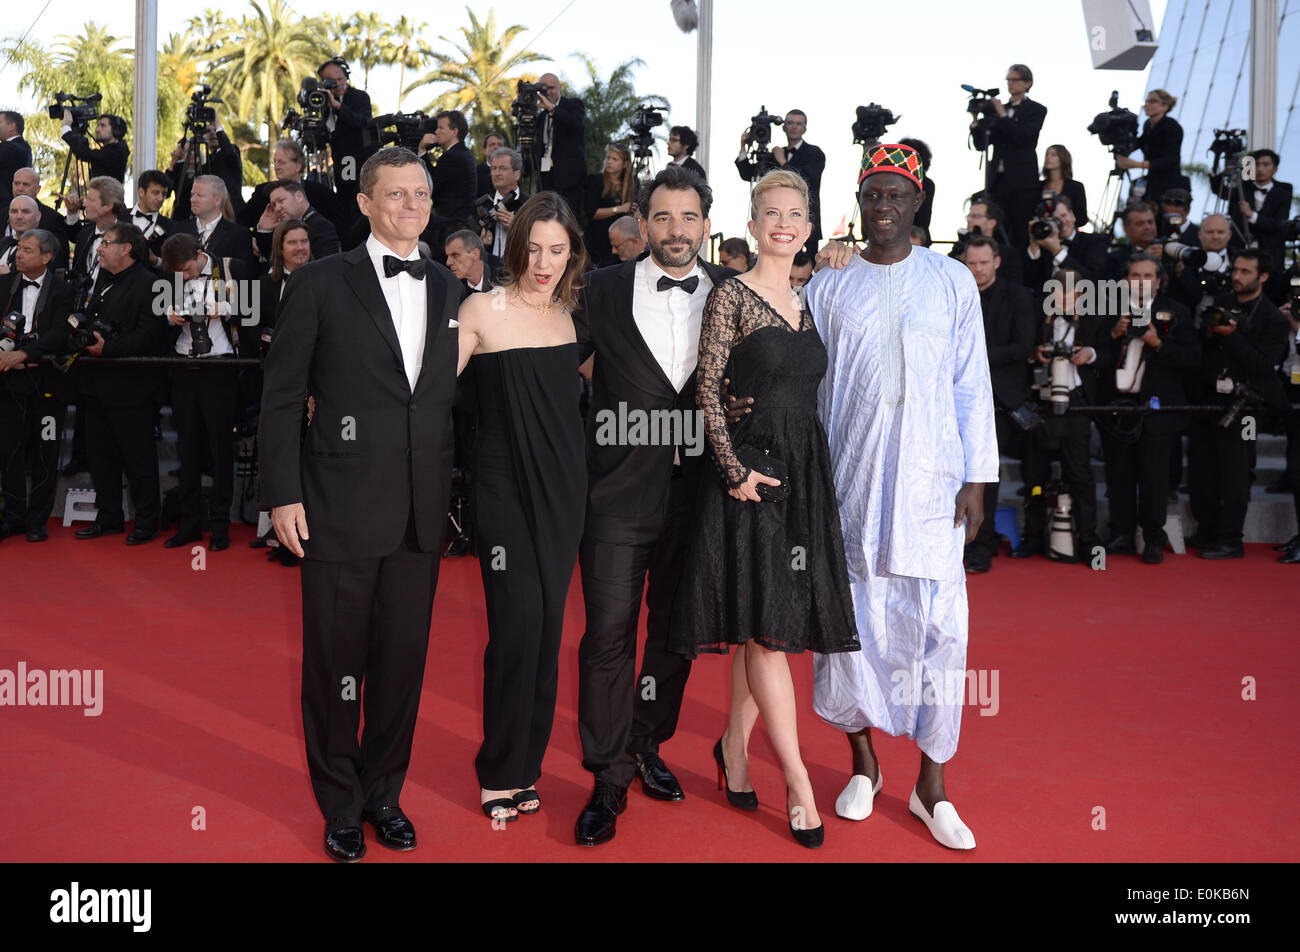 Cannes, France. 15th May, 2014. President of the Criterion Collection Peter Becker, French actress Geraldine Pailhas, Argentinian director Pablo Trapero, Norwegian-Swedish actress Maria Bonnevie and Senegalese director Moussa Toure (from L to R) arrive for the screening of 'Mr Turner' during the 67th Cannes Film Festival, in Cannes, France, May 15, 2014. The movie is presented in the Official Competition of the festival which runs from May 14 to 25. Credit:  Ye Pingfan/Xinhua/Alamy Live News Stock Photo